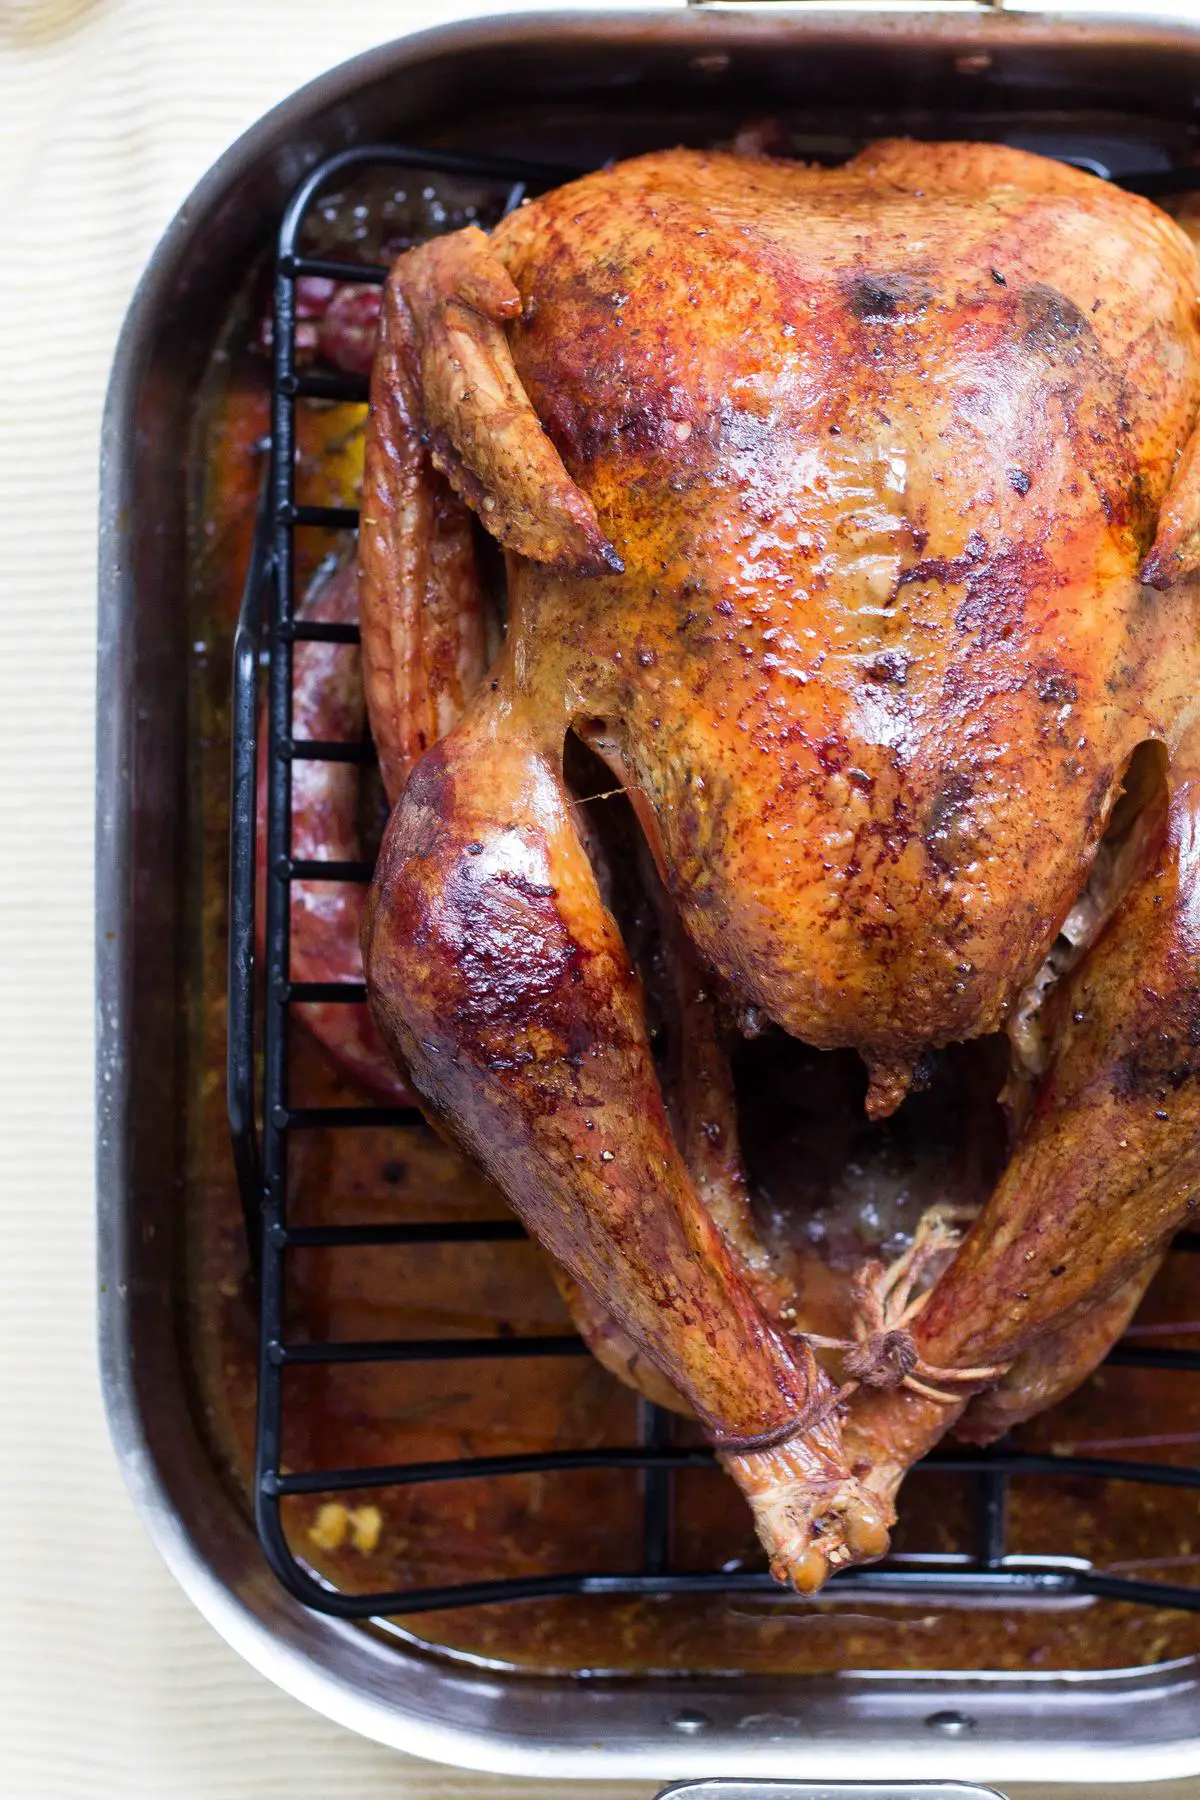 A juicy rotisserie chicken from Costco, perfect for family meals and budget-friendly cooking.